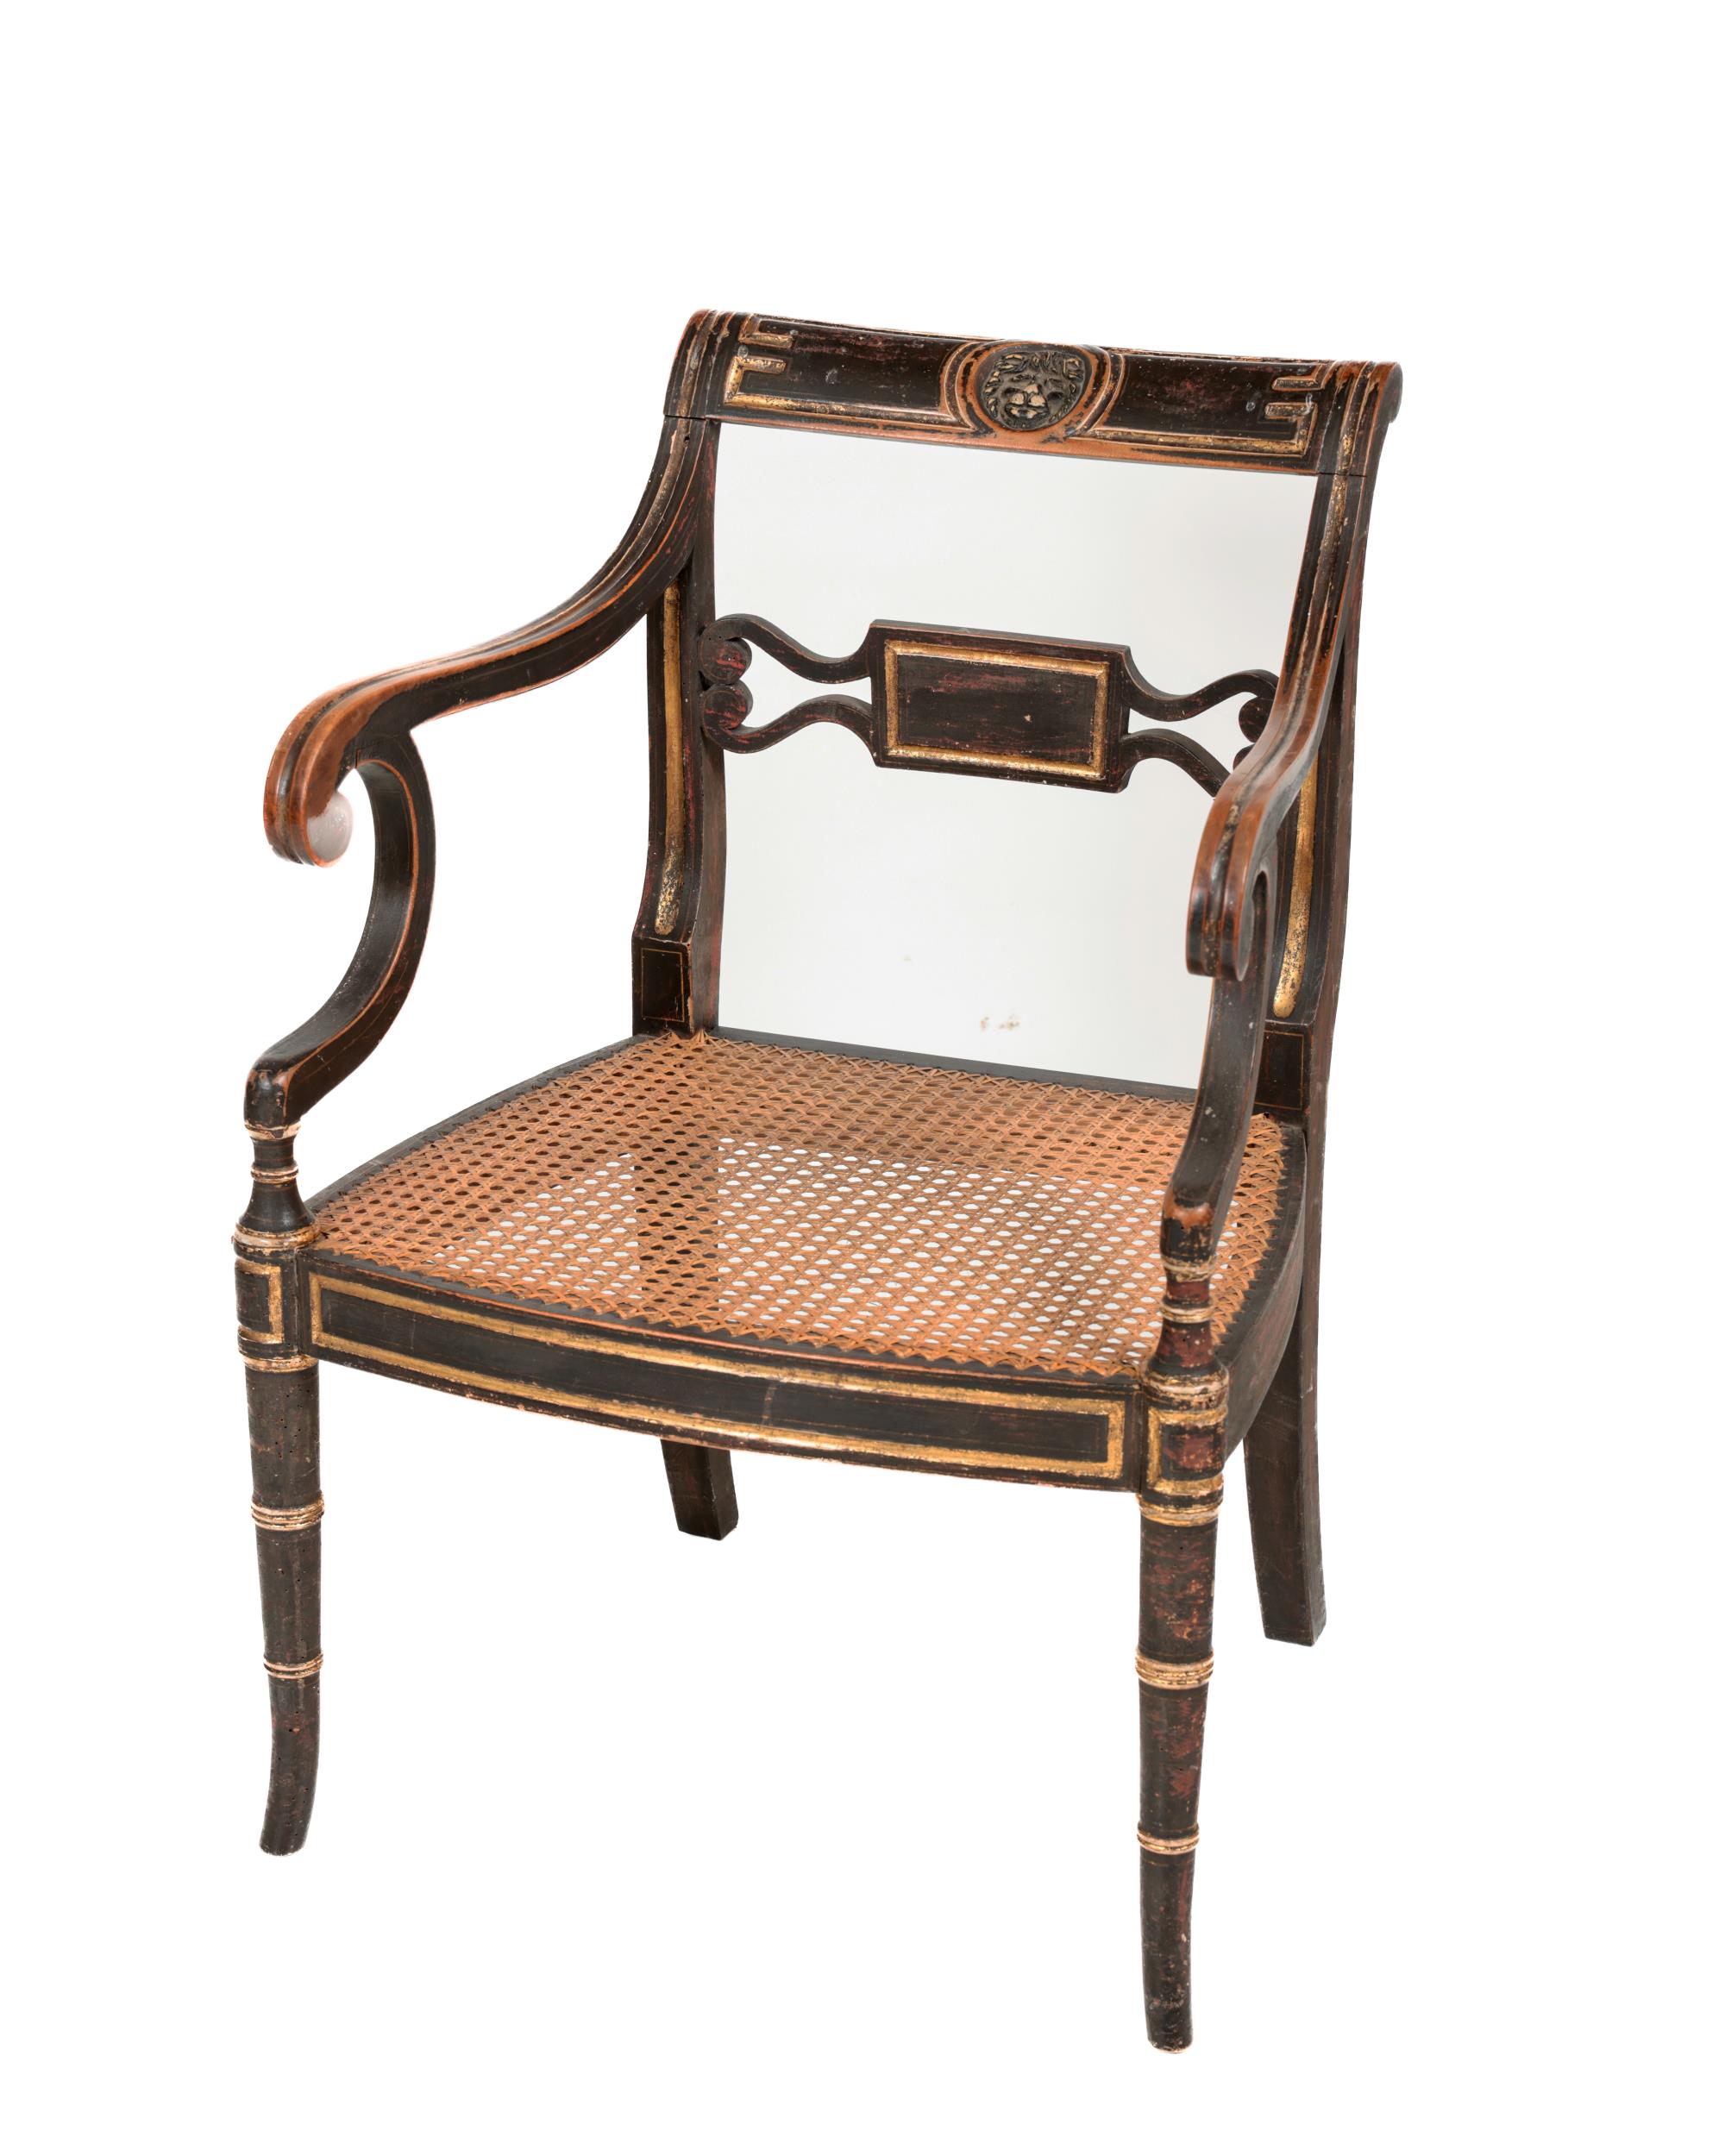 A Regency ebonised Open Armchair, the shaped back with central carved lions head, with scroll